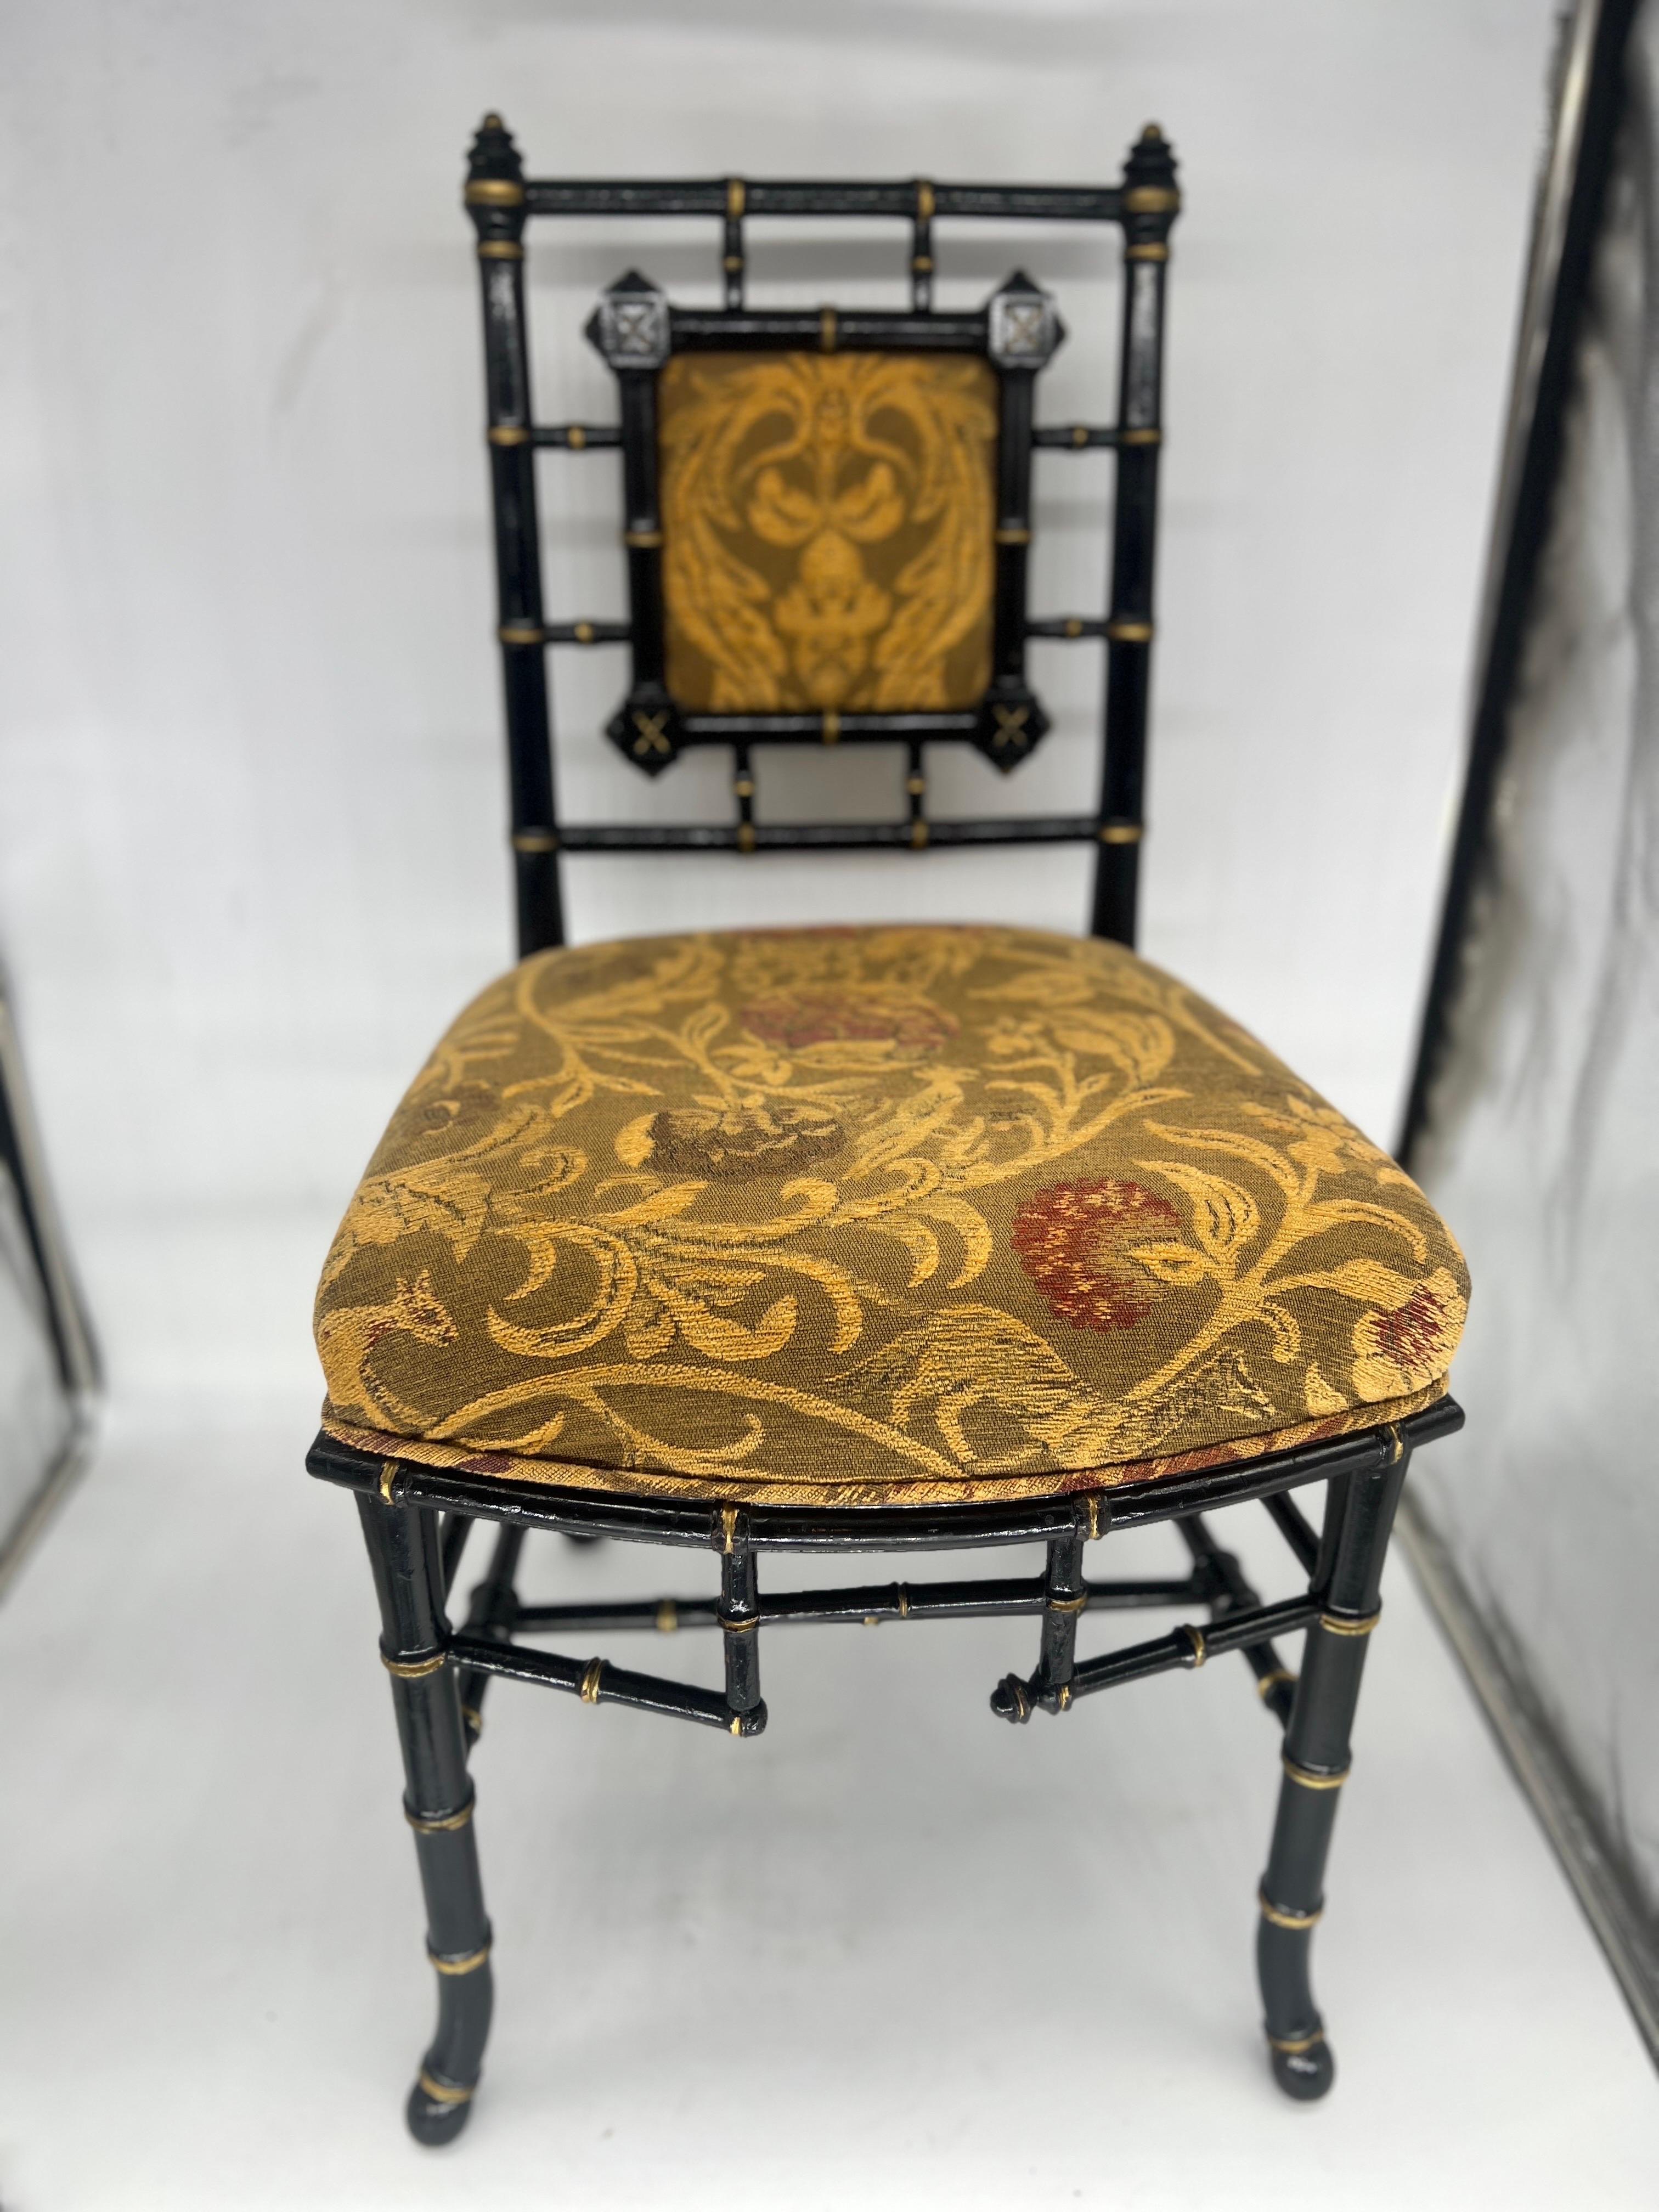 Exquisite Antique Aesthetic Movement Faux Bamboo Side Chair, ATTR: Herter Brothers

*Please View Other Listings - Matching Ottoman and Piano Stool*

Presenting an exceptional piece of 19th-century design, this Antique Aesthetic Movement Faux Bamboo